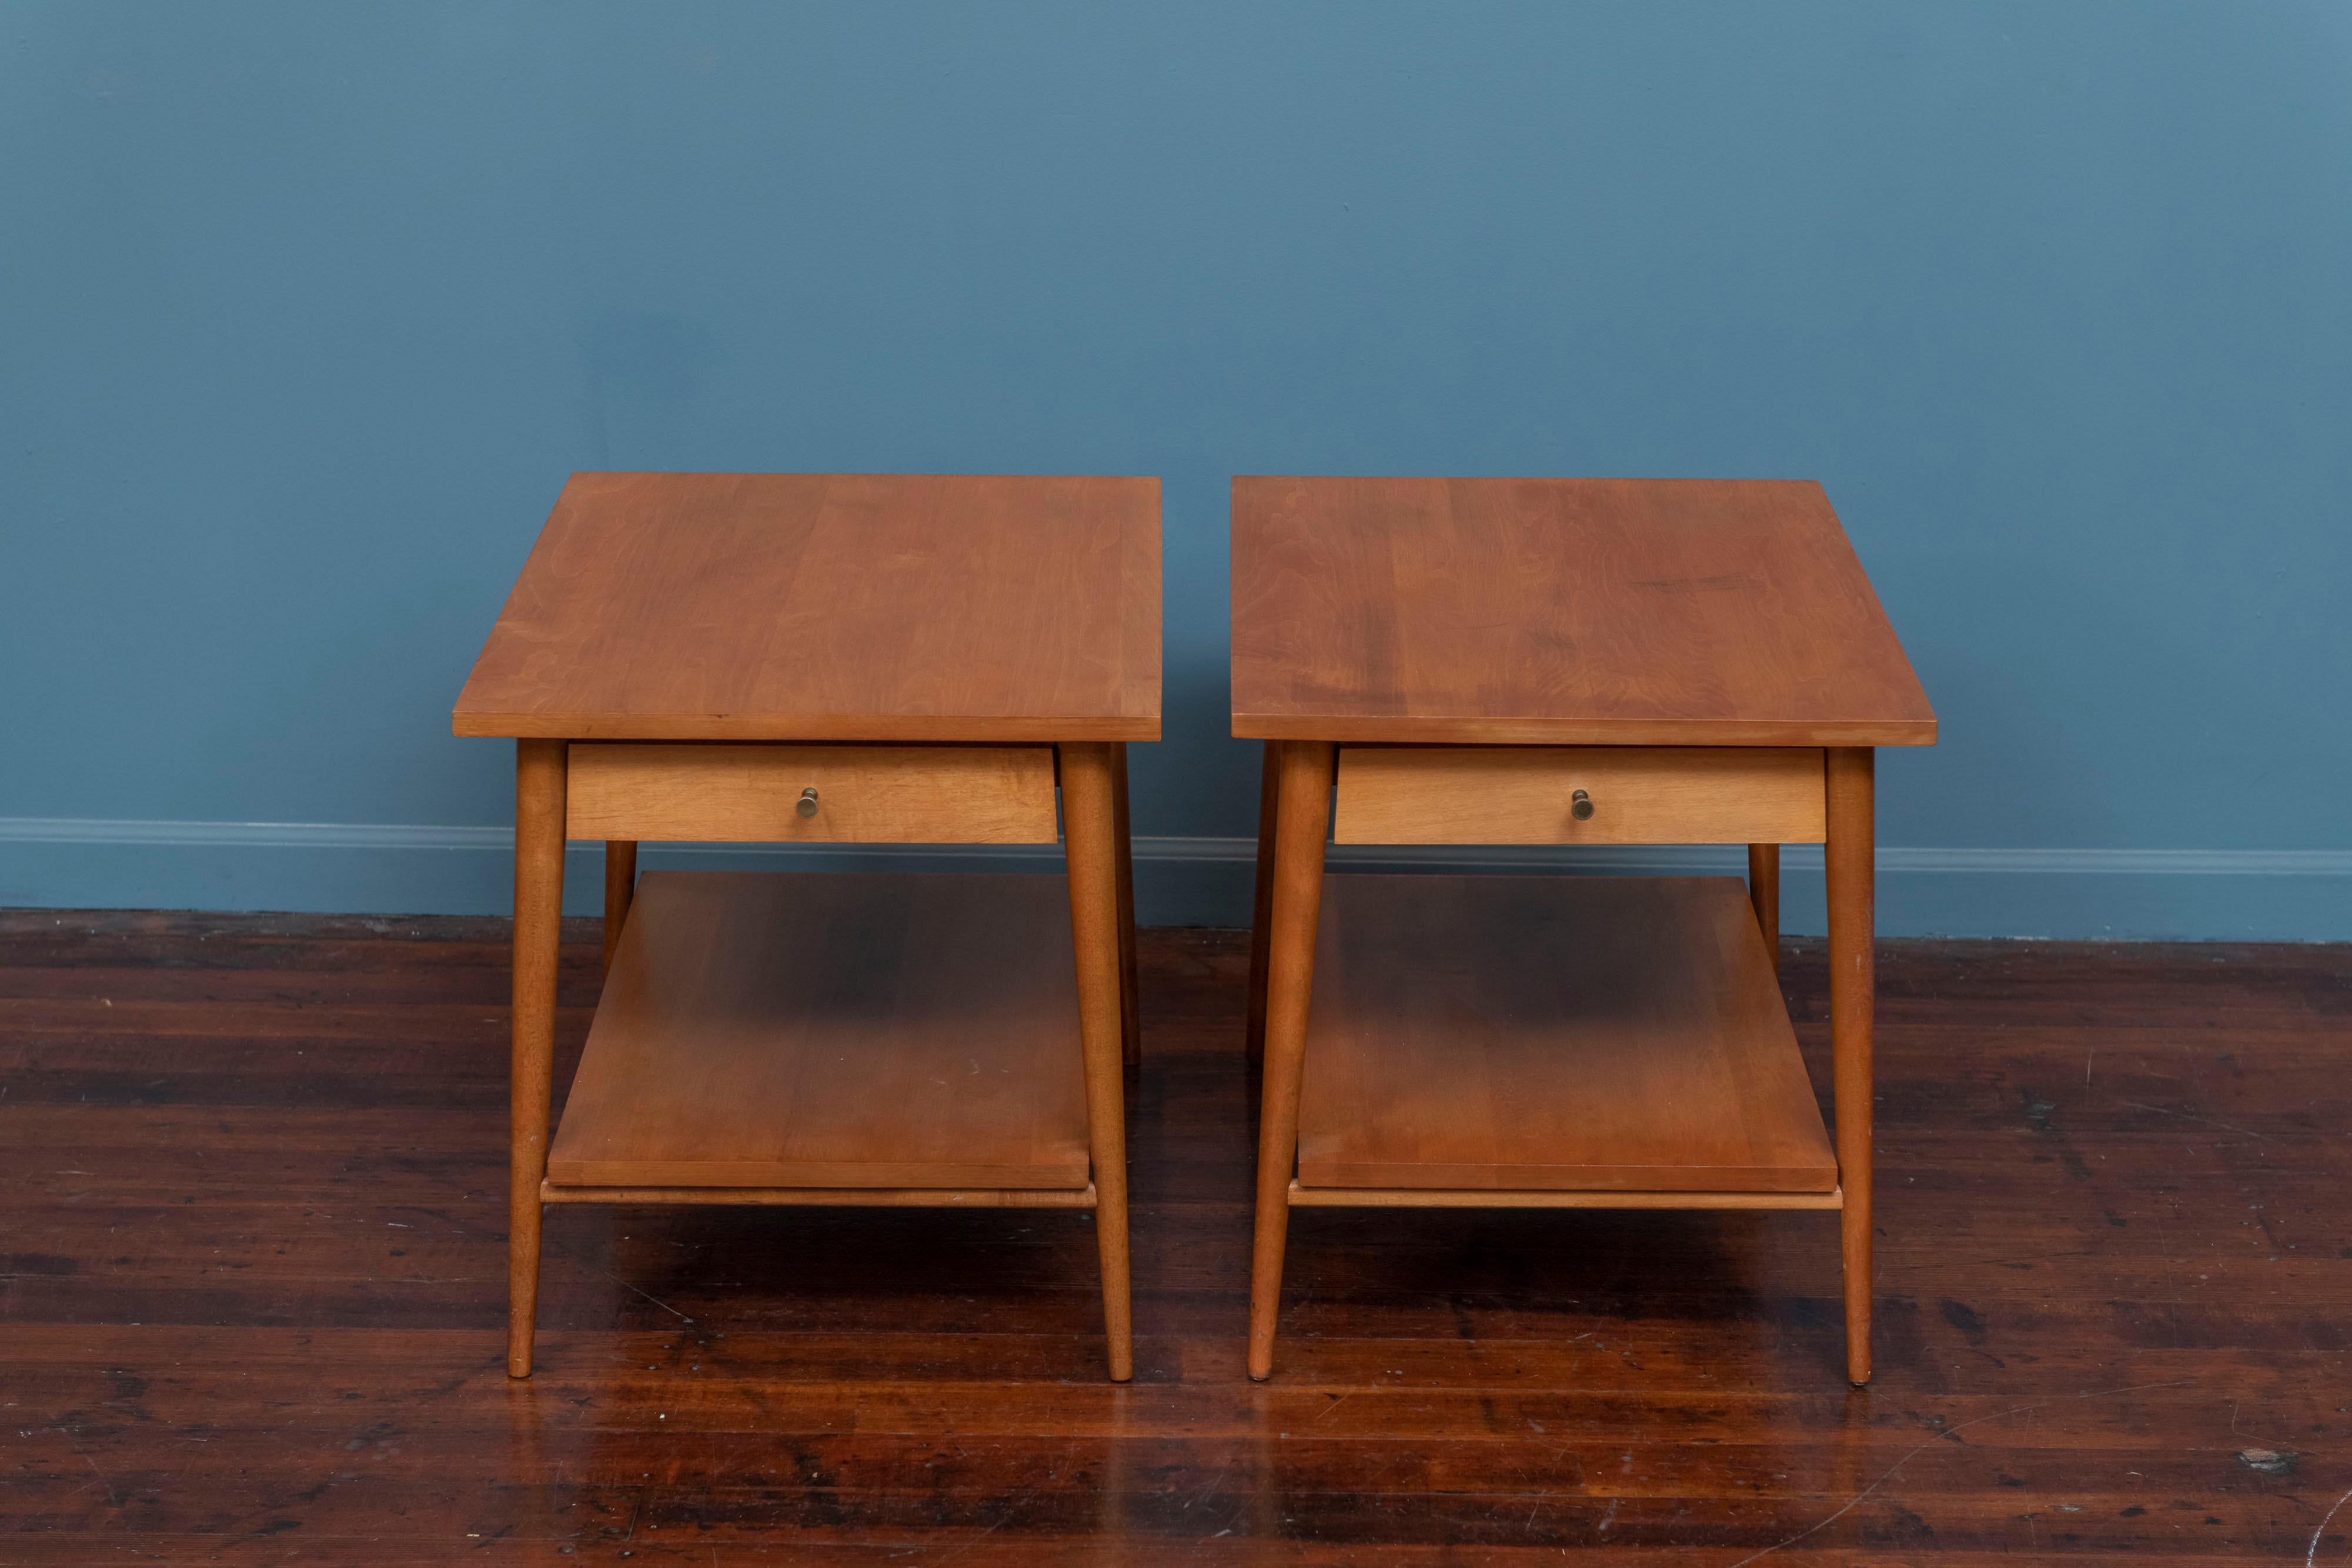 Pair of Paul McCobb design Planner Group side tables for Winchendon Furniture. Original matched pair in solid maple with brass cone shape pulls, labeled and in very good original condition. 
One table has a faint shadow of a stain but still